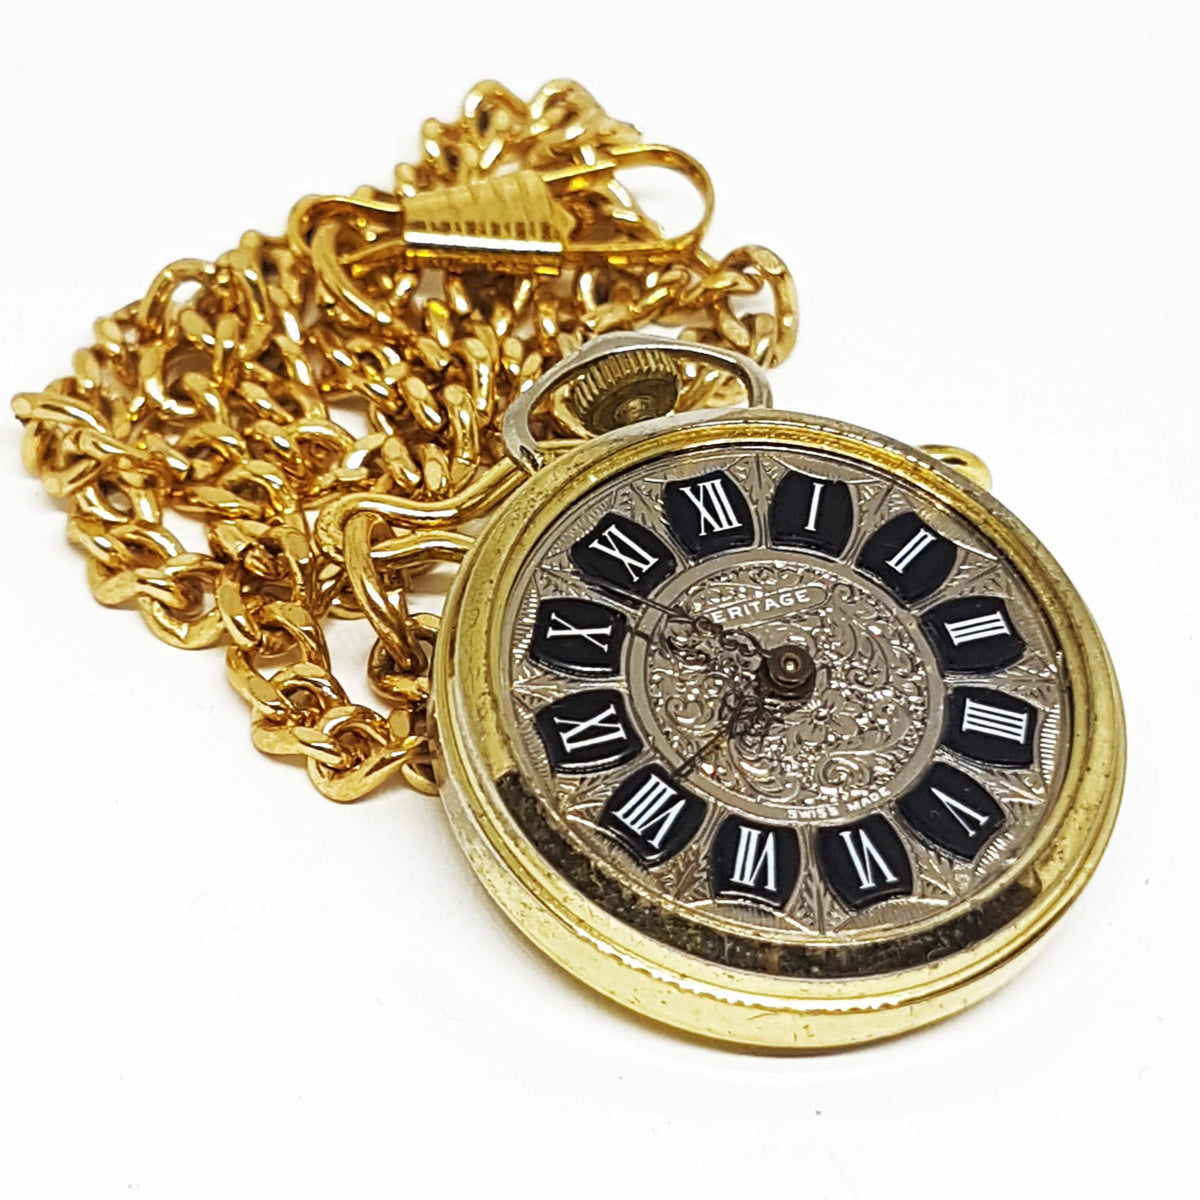 Swiss Made Pocket Watches | lupon.gov.ph